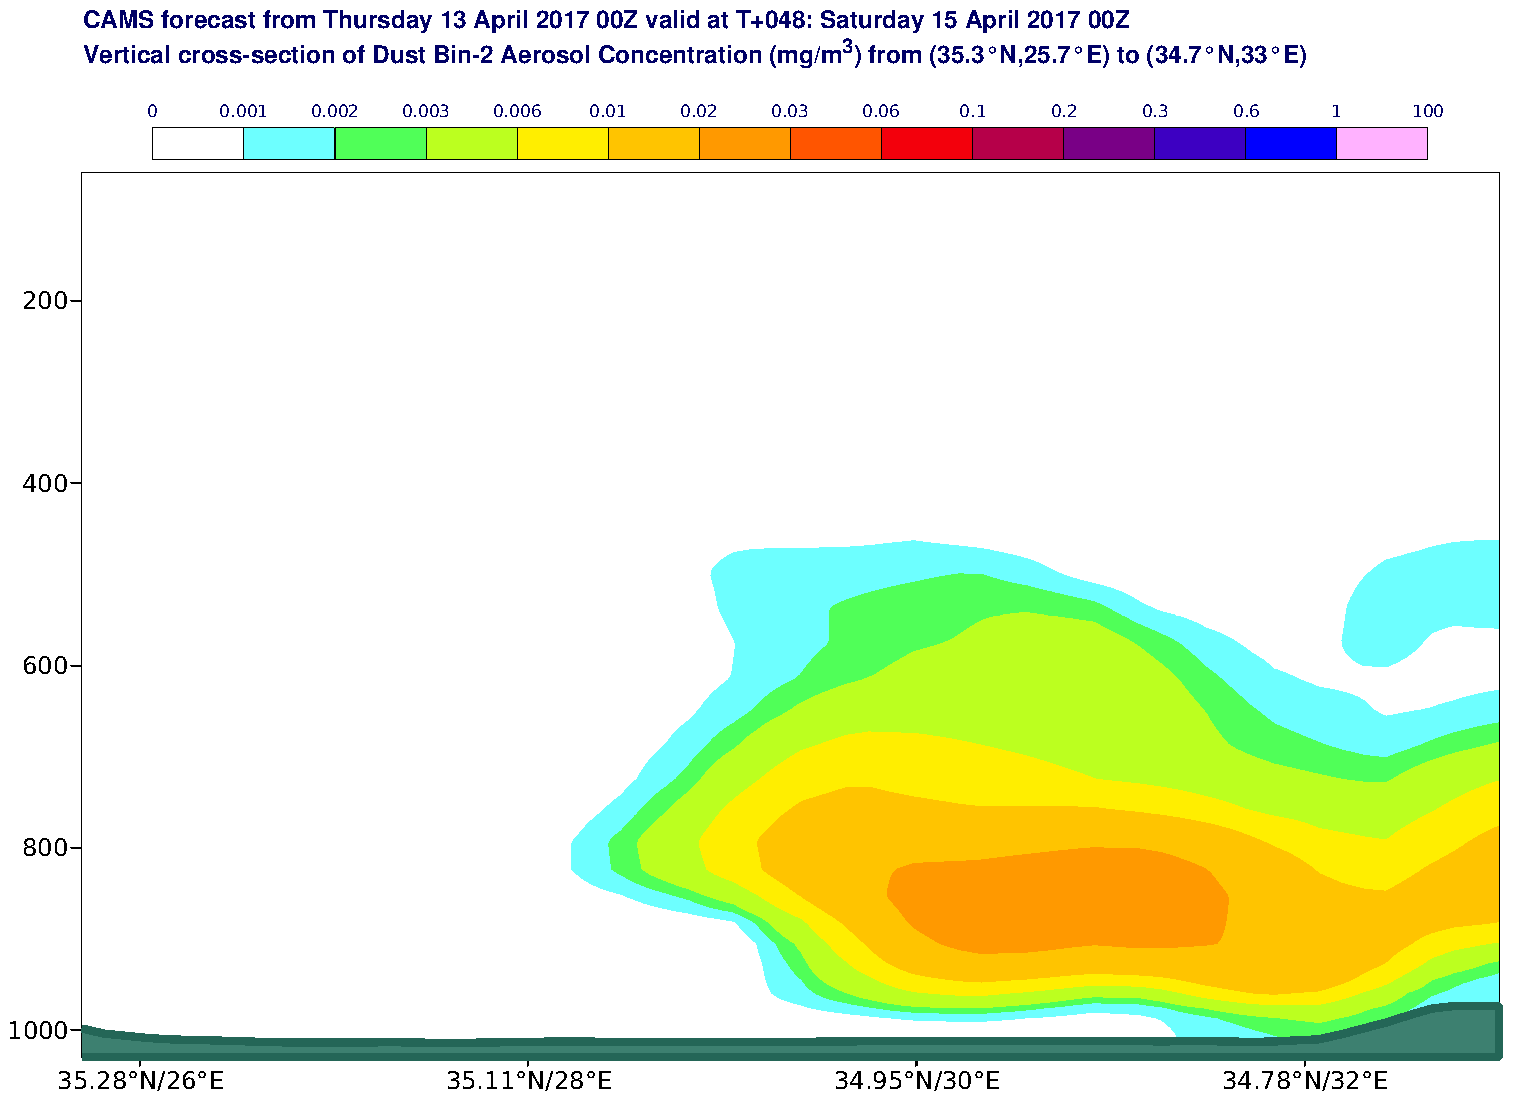 Vertical cross-section of Dust Bin-2 Aerosol Concentration (mg/m3) valid at T48 - 2017-04-15 00:00